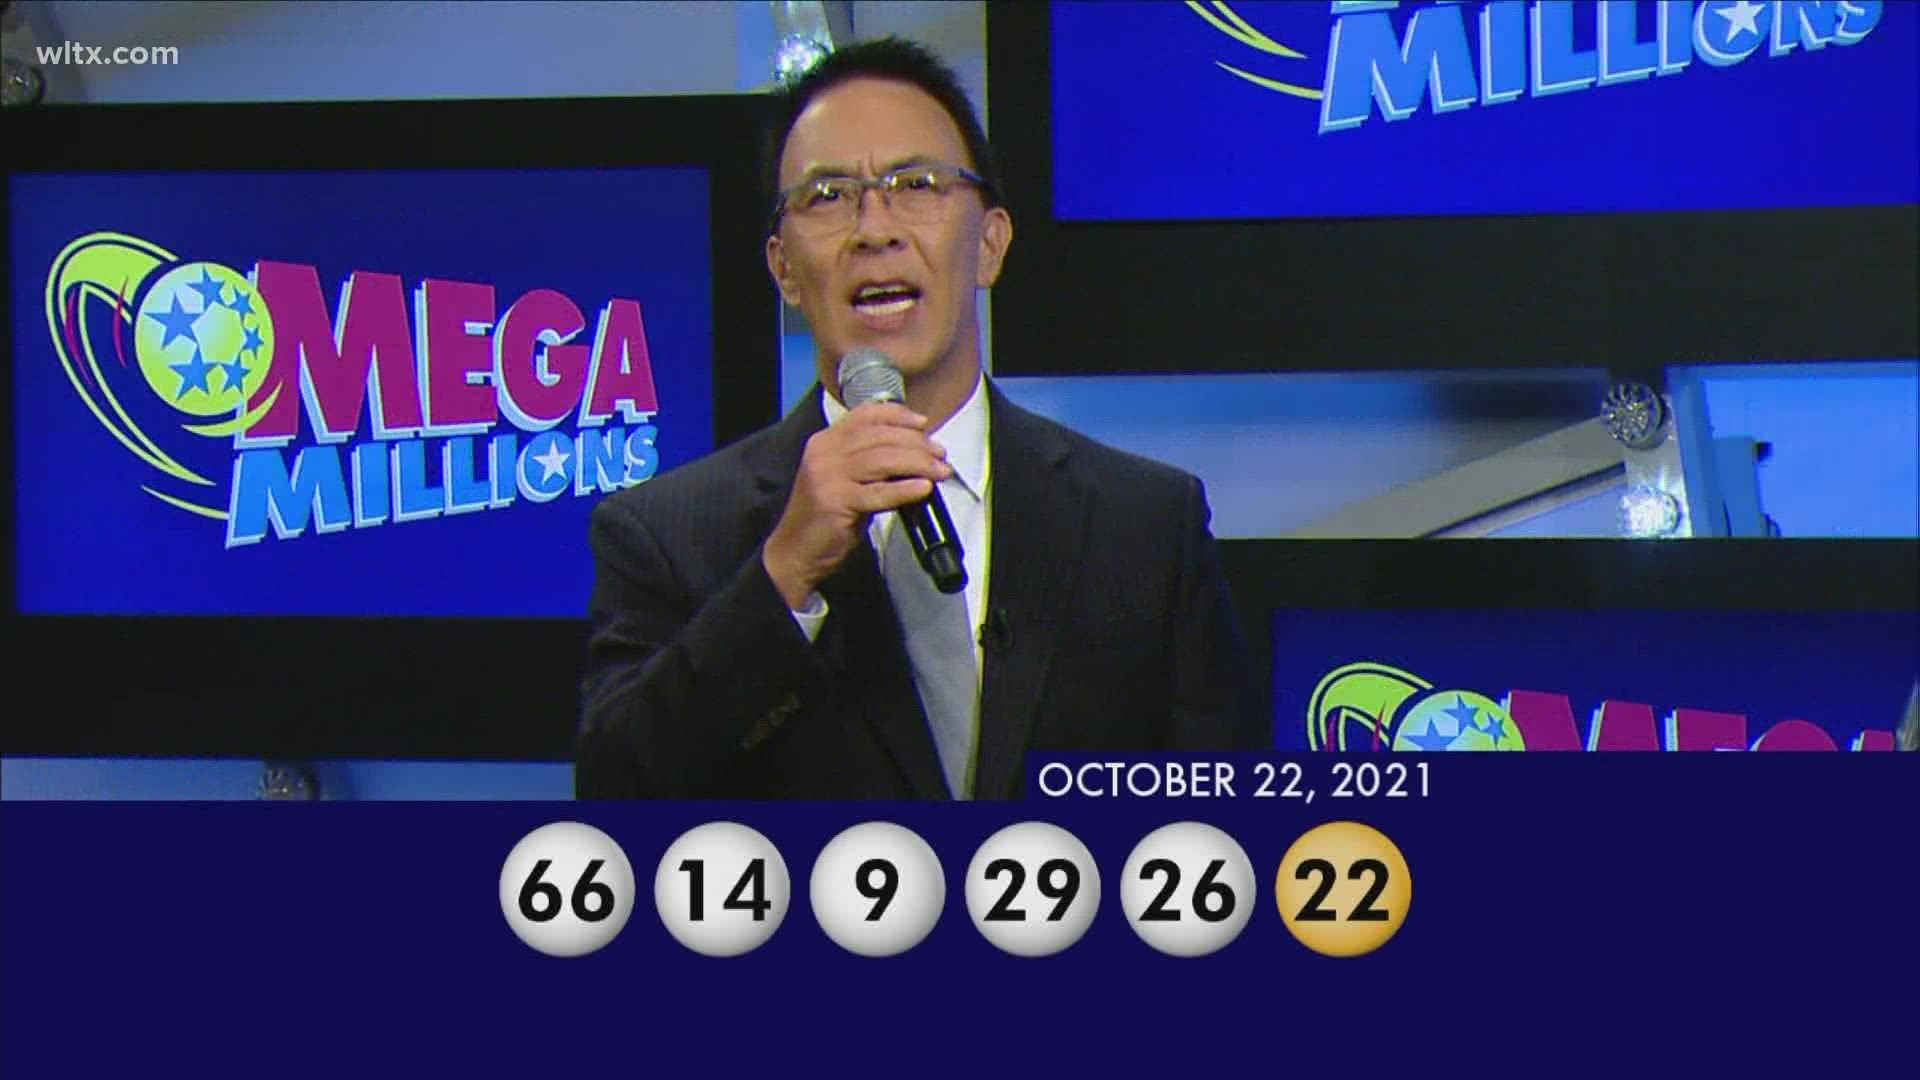 These are the winning MegaMillions numbers for Friday October 22, 2021